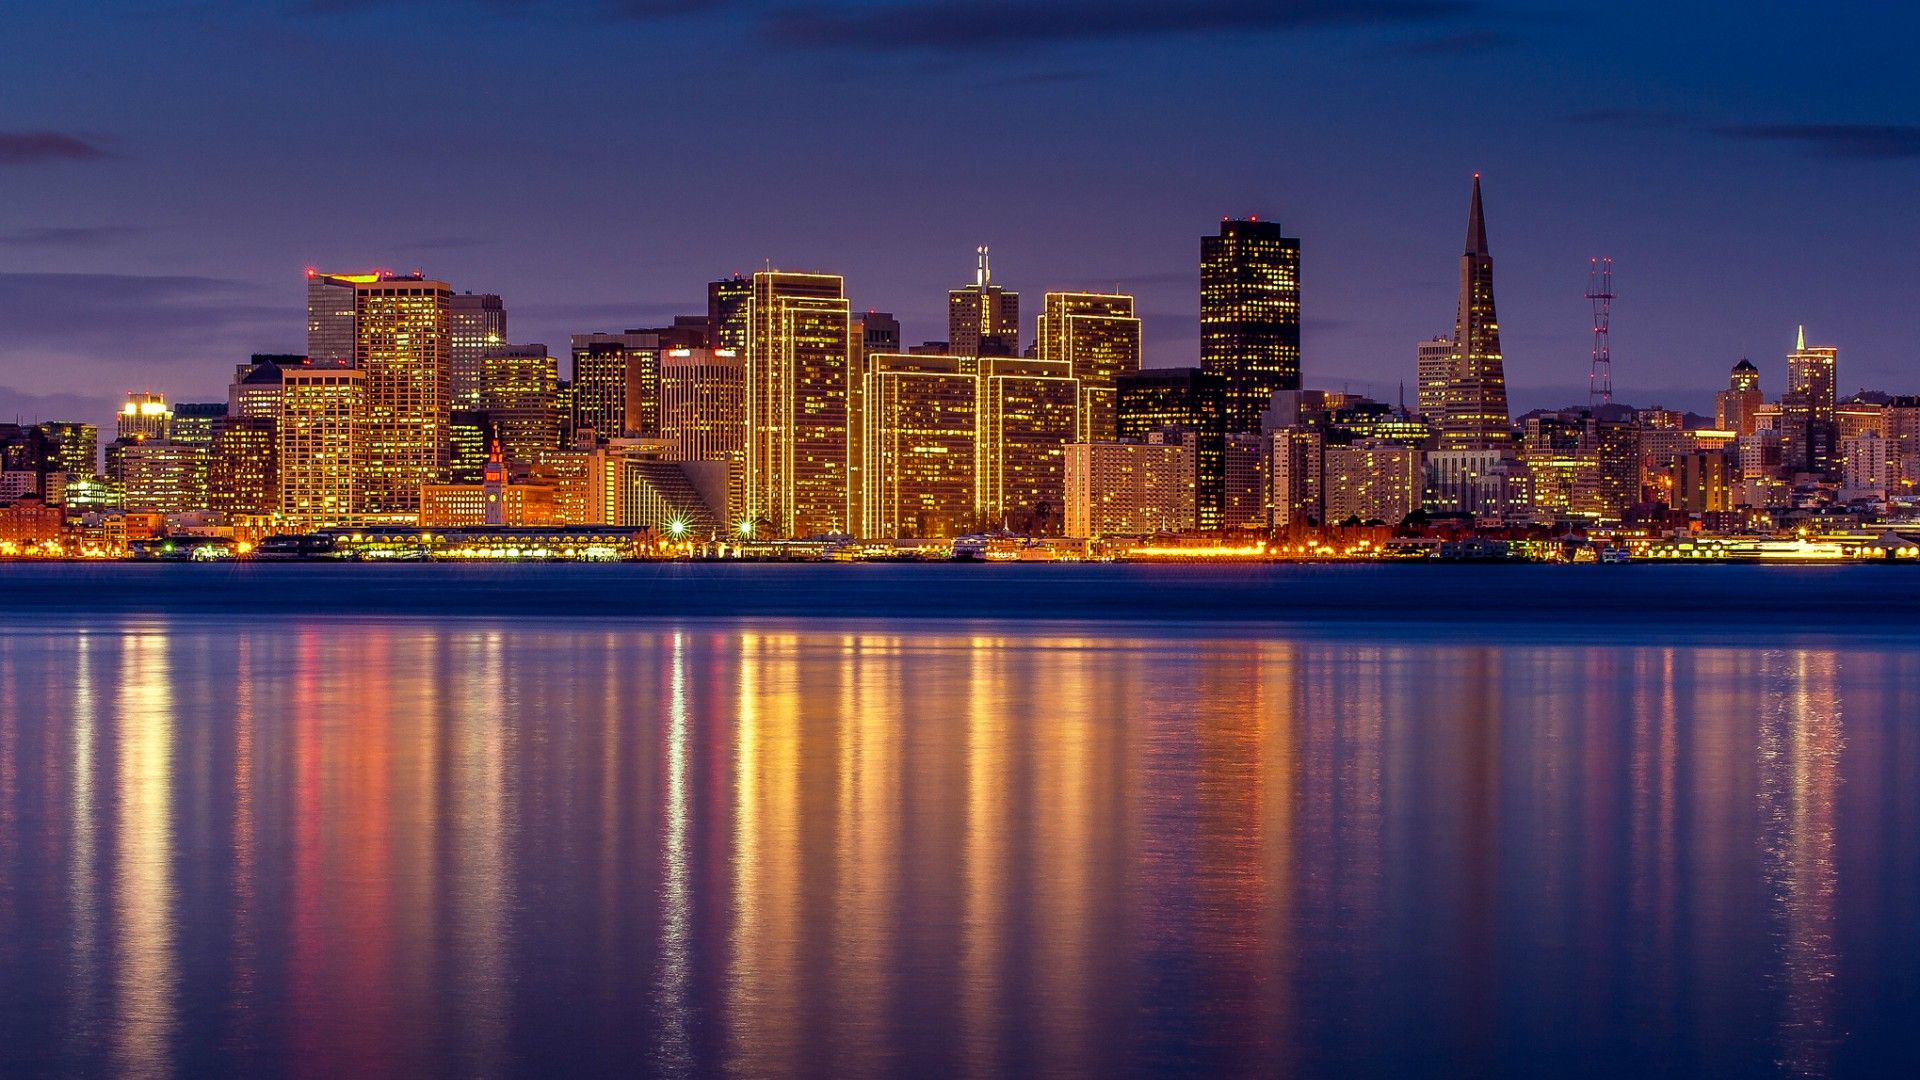 San Francisco at night, with the lights reflecting off the water. - City, California